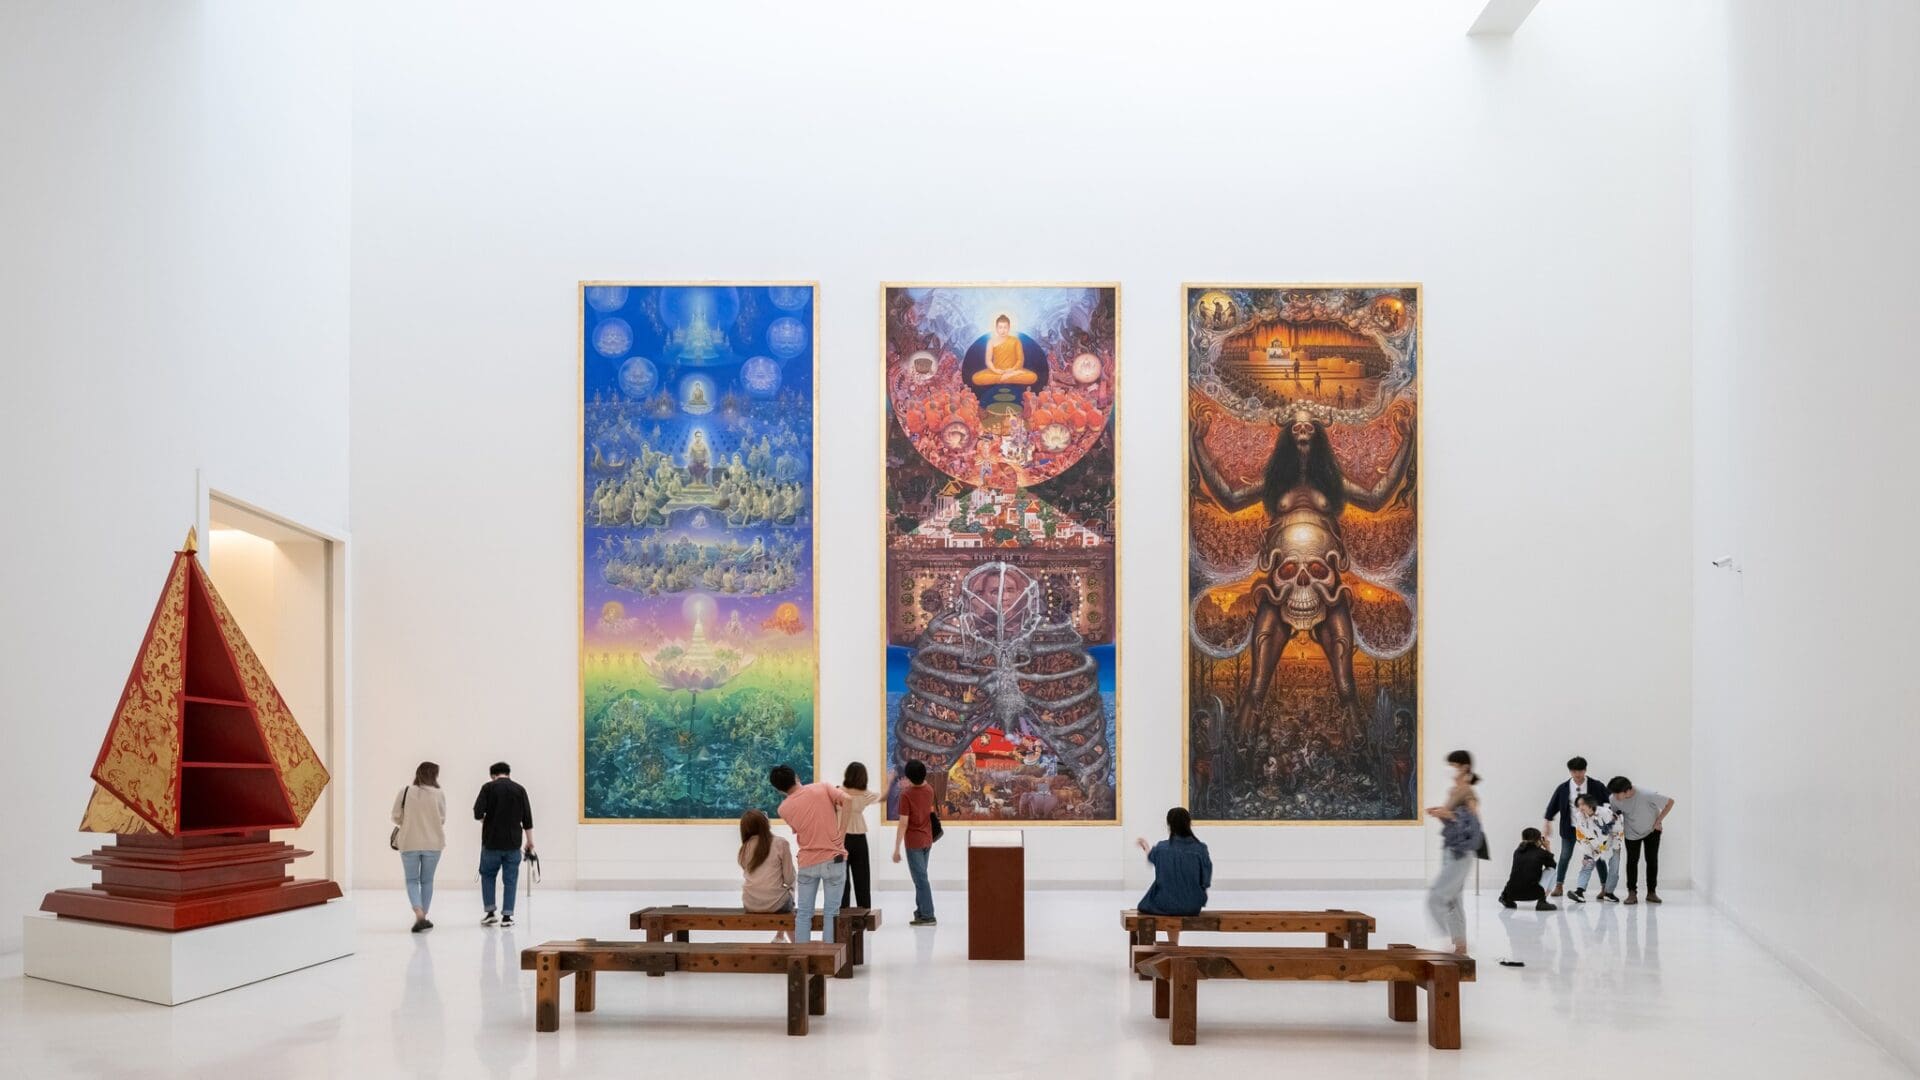 The best museums and galleries in Bangkok | a view of a tall white walled gallery inside Moca Bangkok, with three long colourful canvases arranged next to one another on the far wall. People gather among benches to view the art works